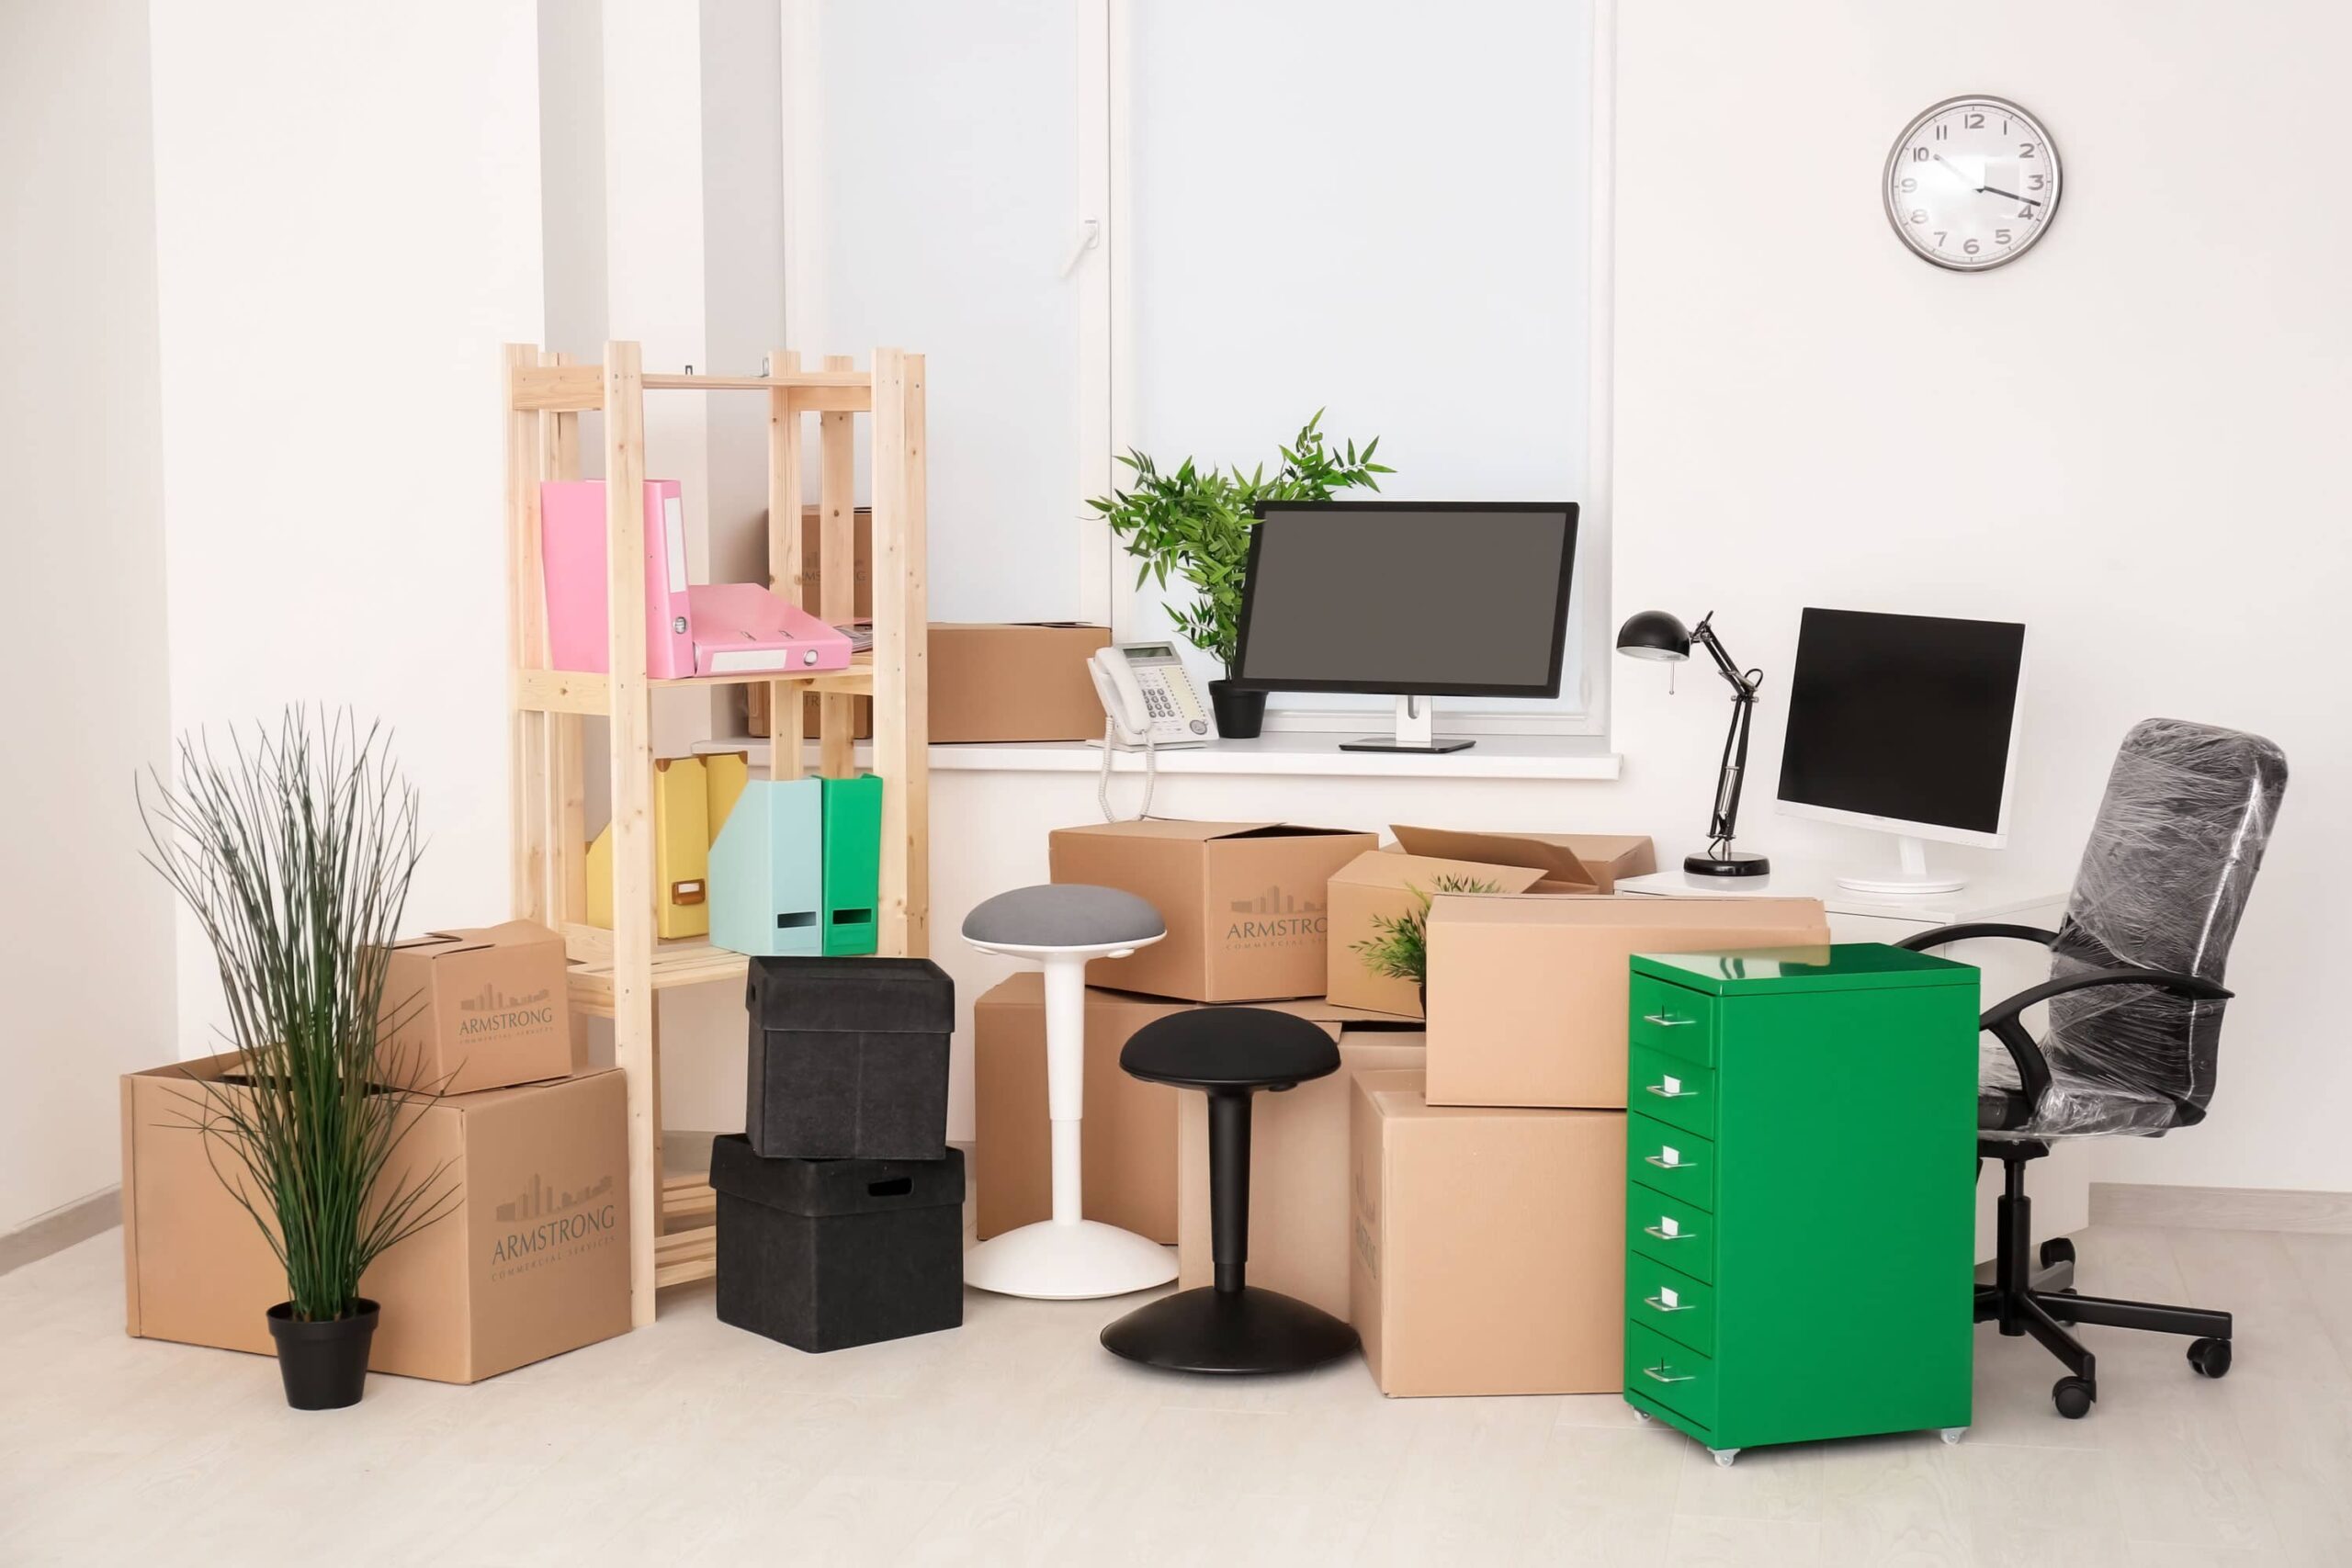 5 Things to Consider When Downsizing Your Office